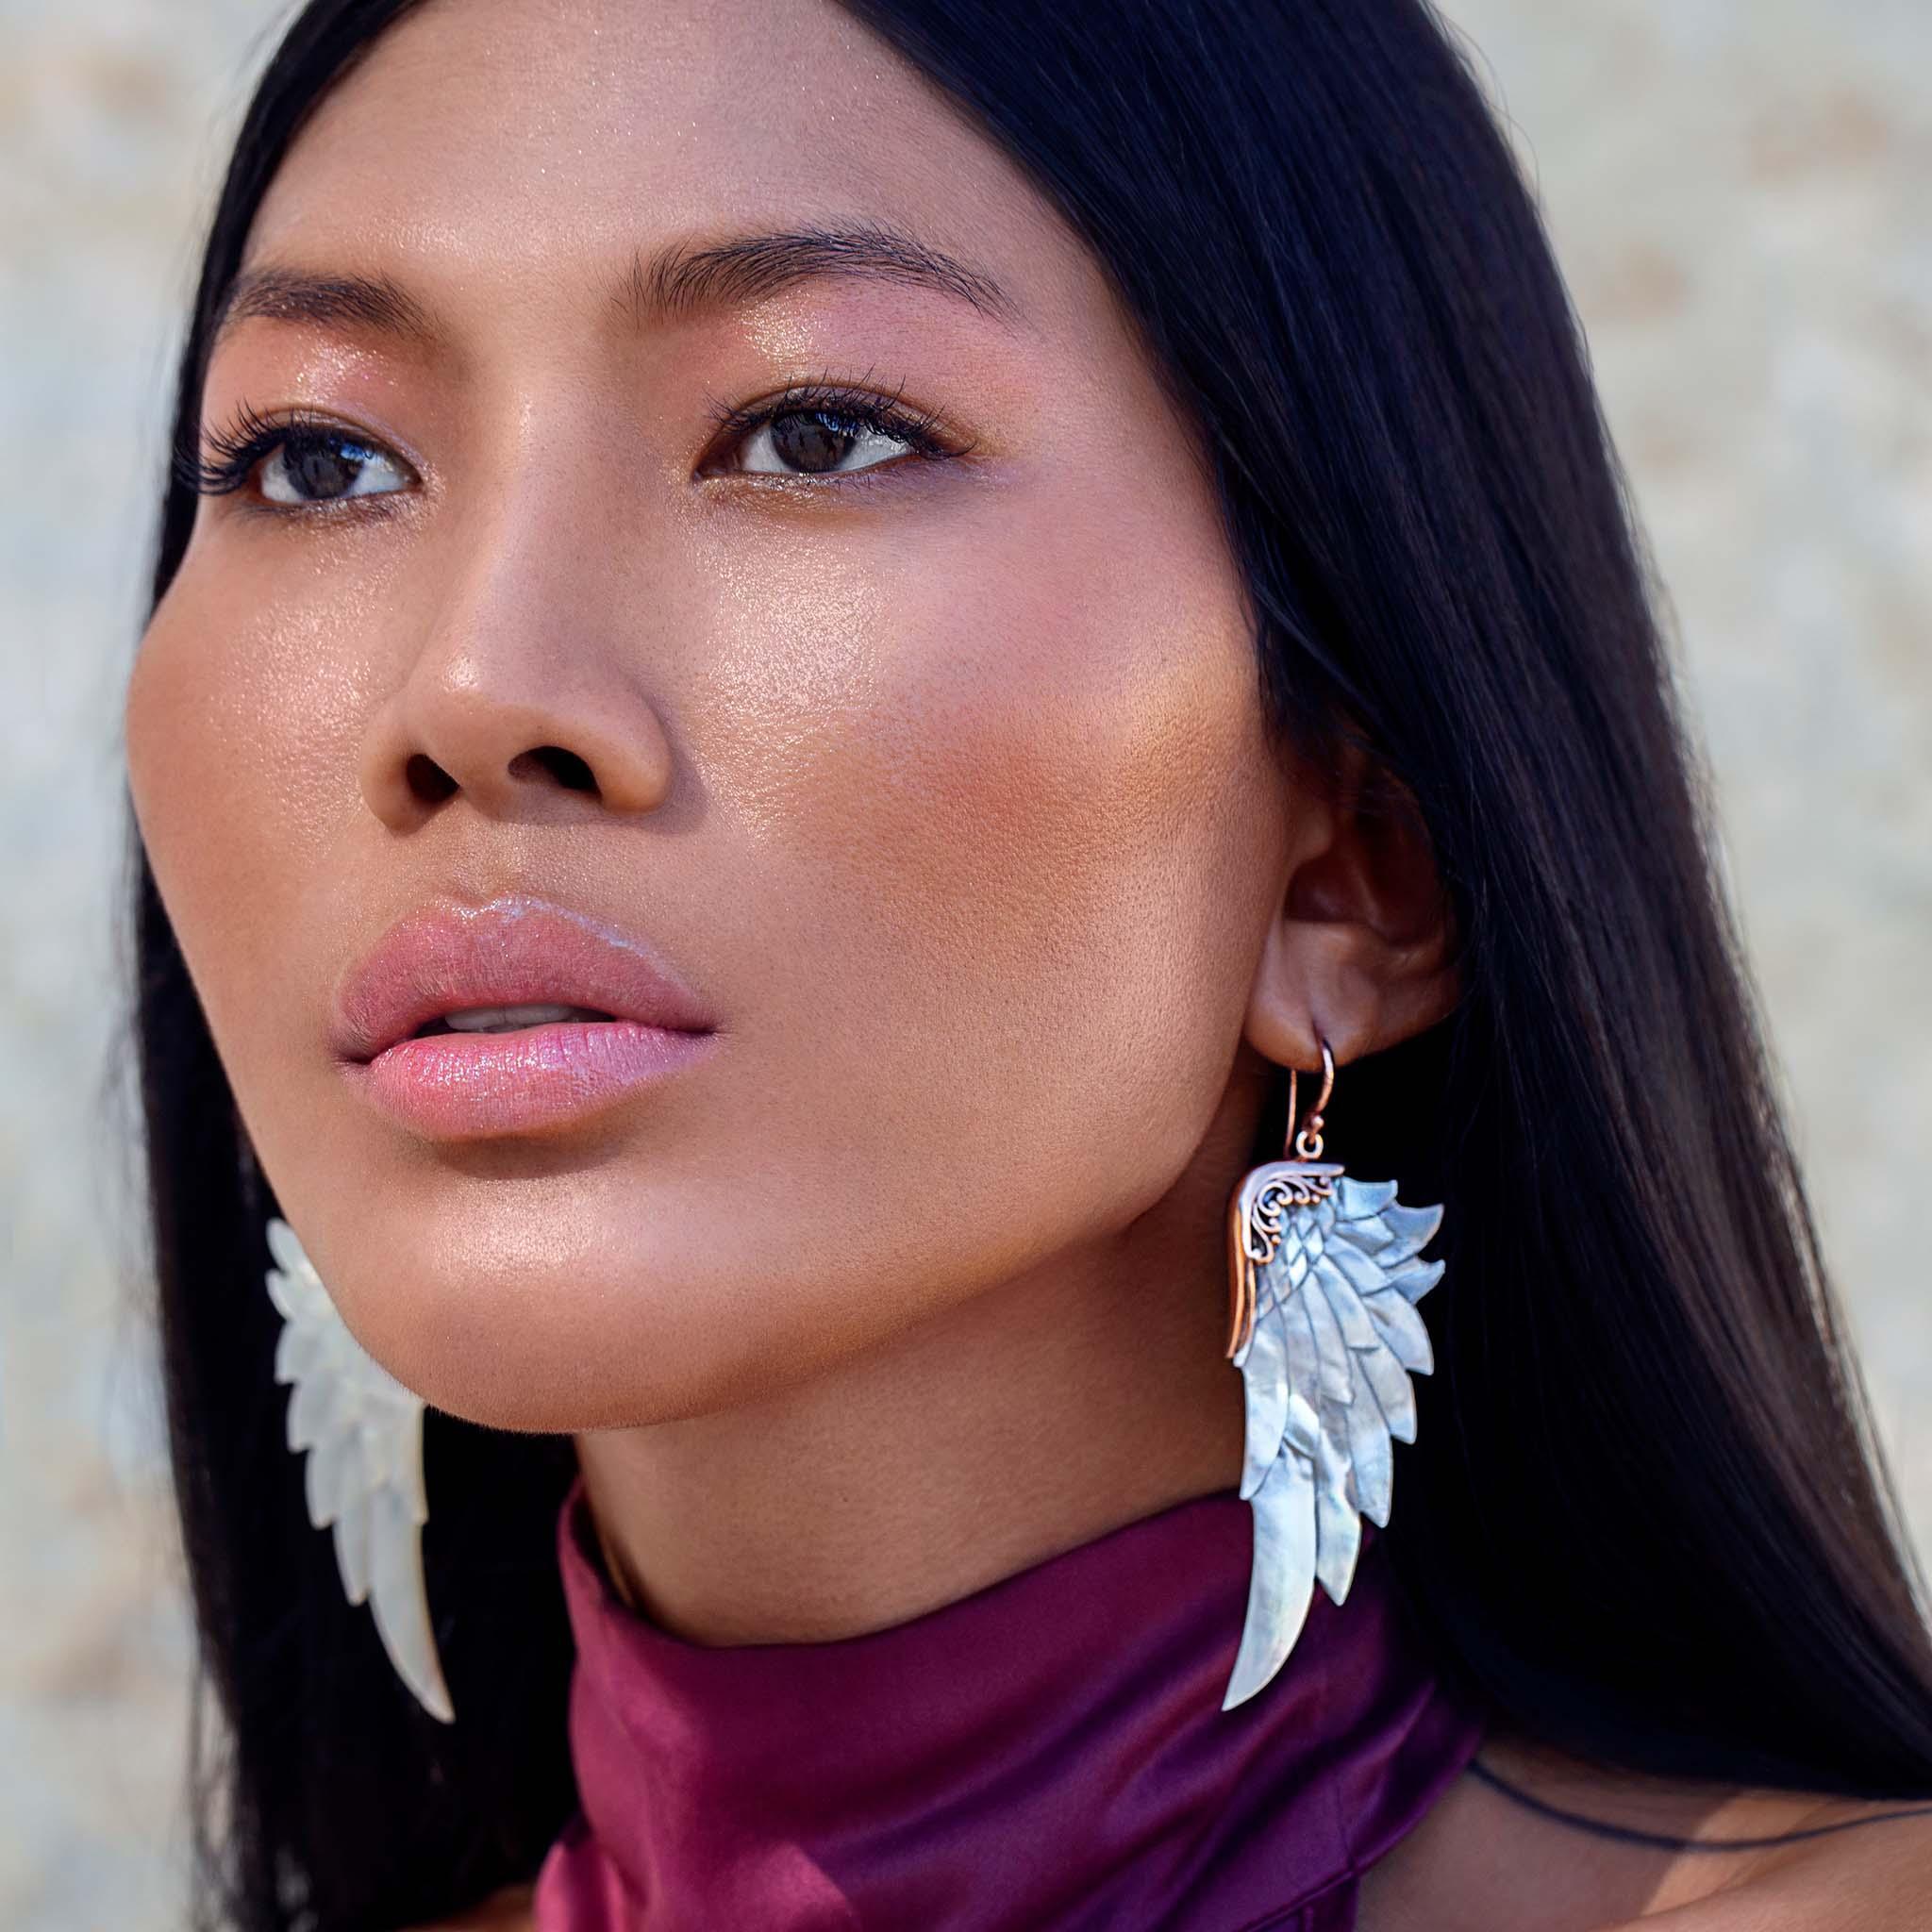 LIMITED STOCK - Lalimalu Purist Rose Angel Wing Earrings - womens jewellery by indie and harper